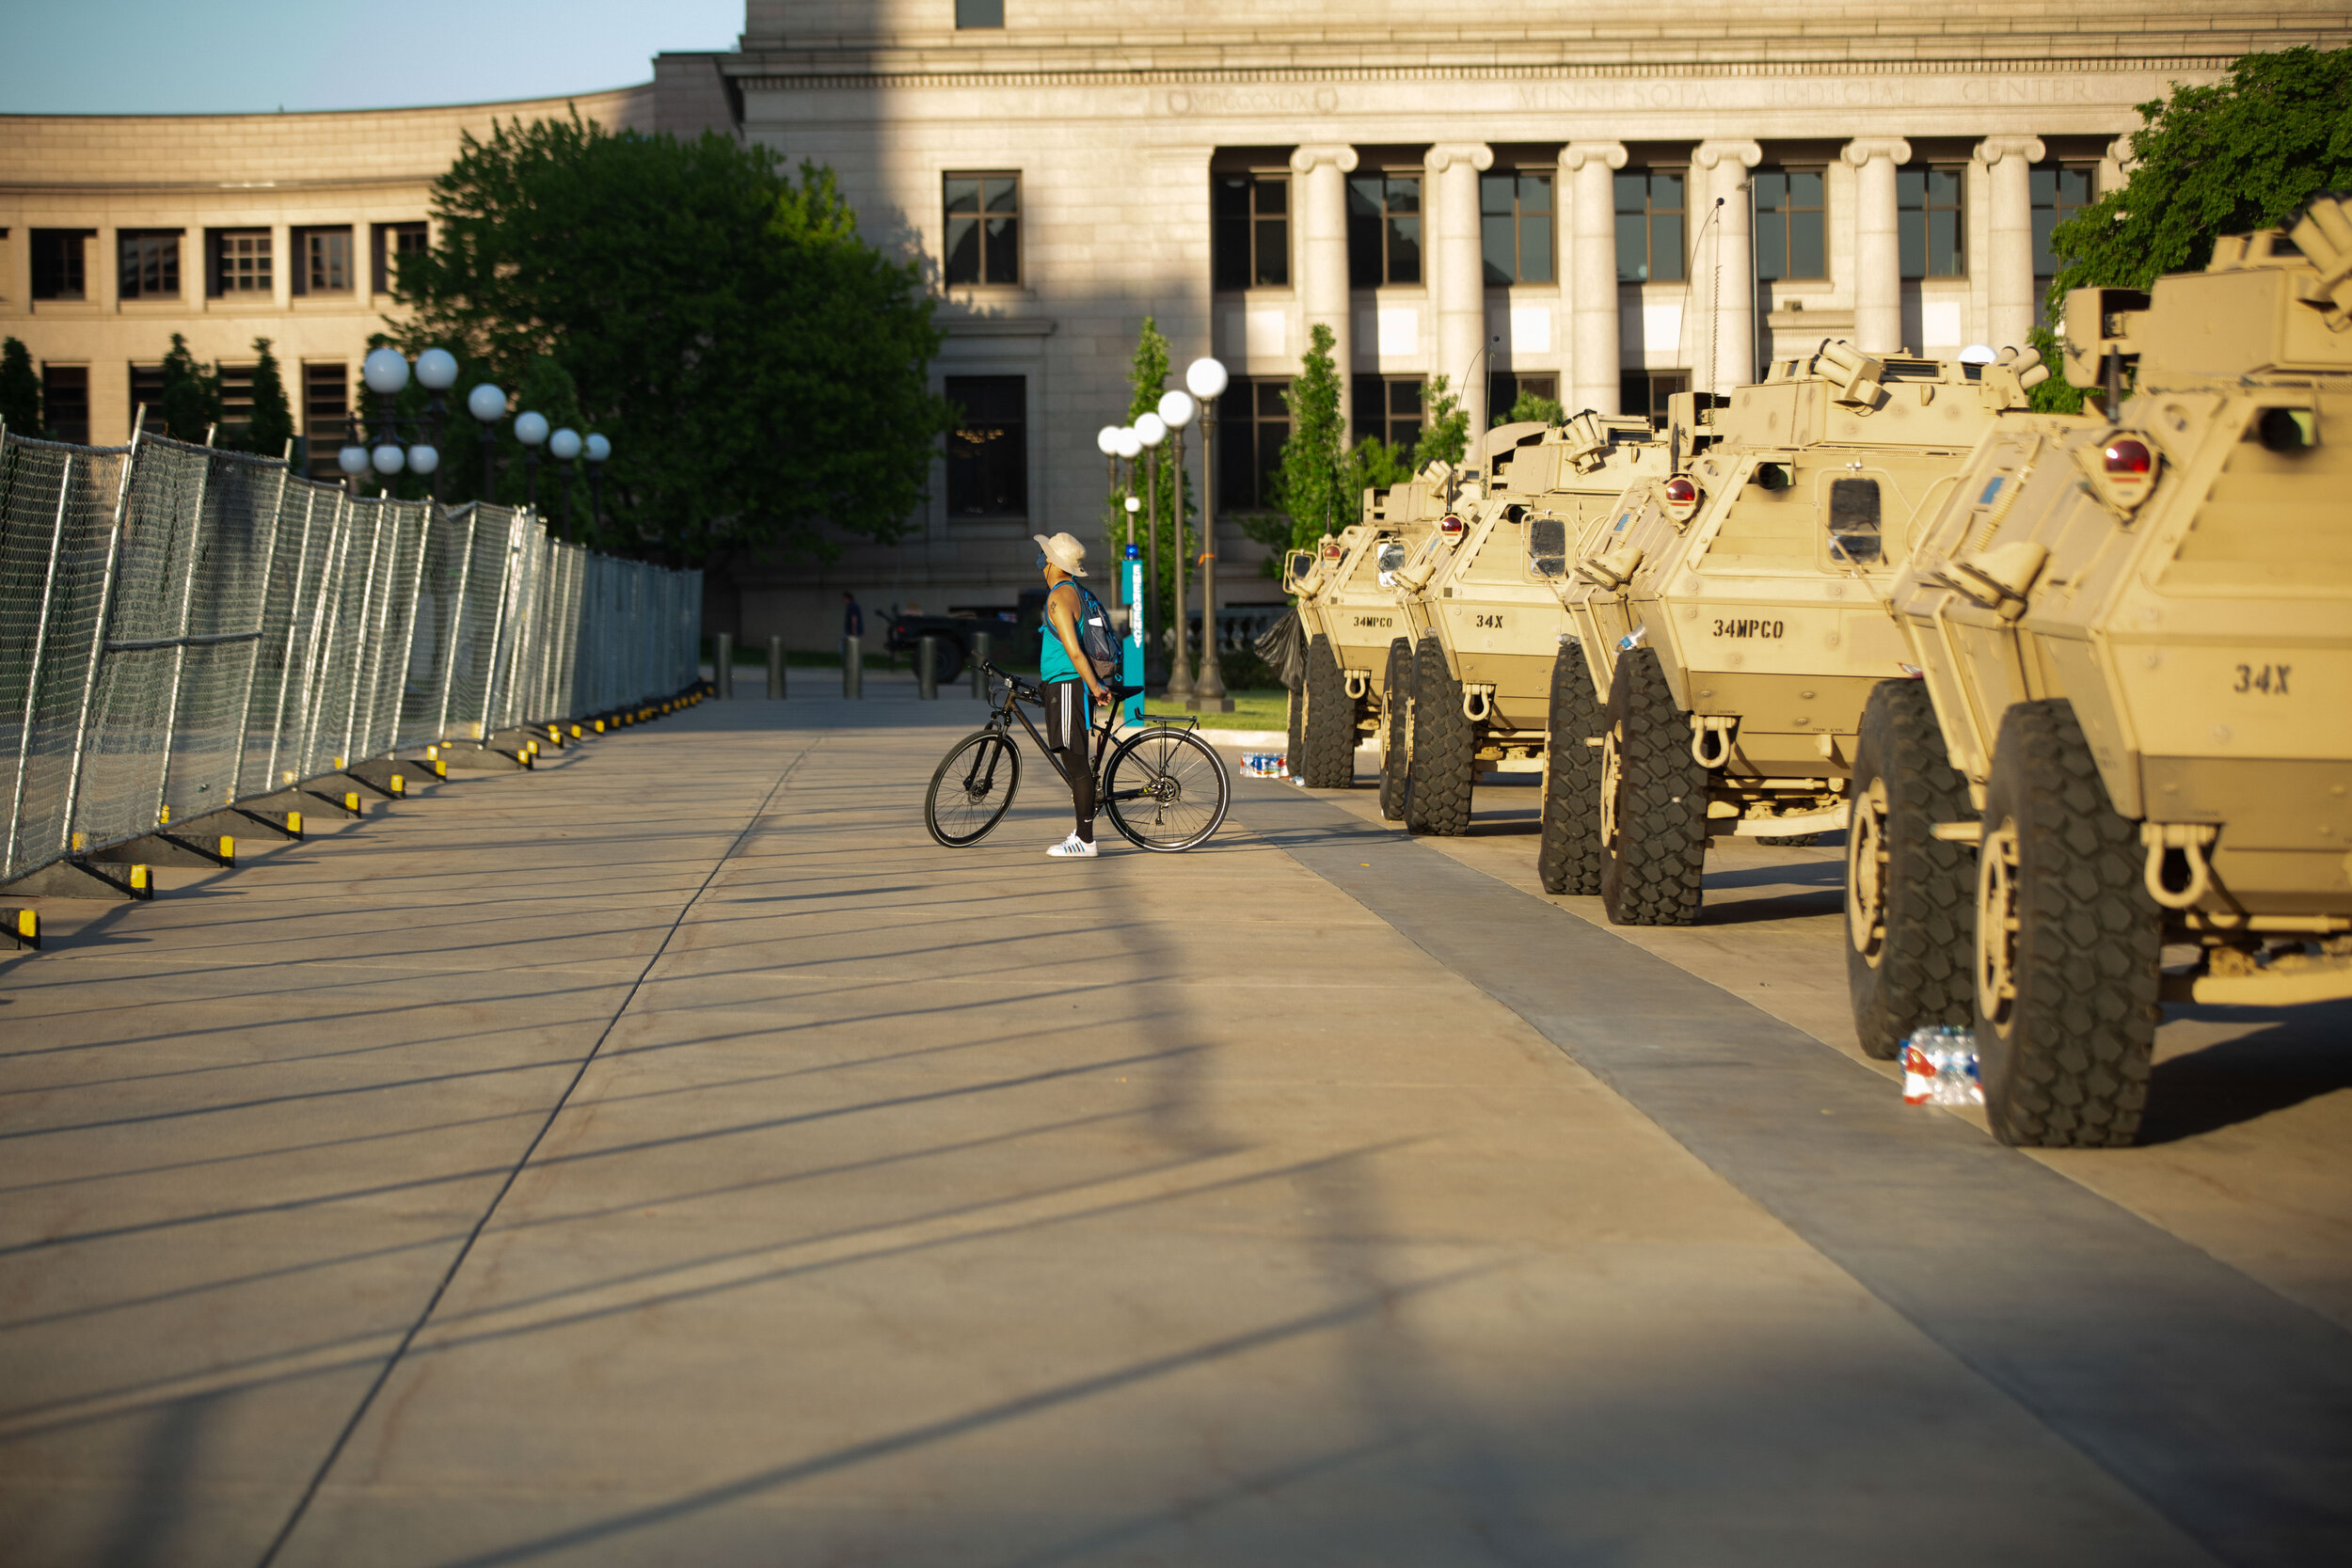  A biker stops in between the line of armored vehicles and the fence to guard the State Capitol building in Saint Paul, Minnesota during a peaceful protest on June 1, 2020. Chris Juhn/Zenger 